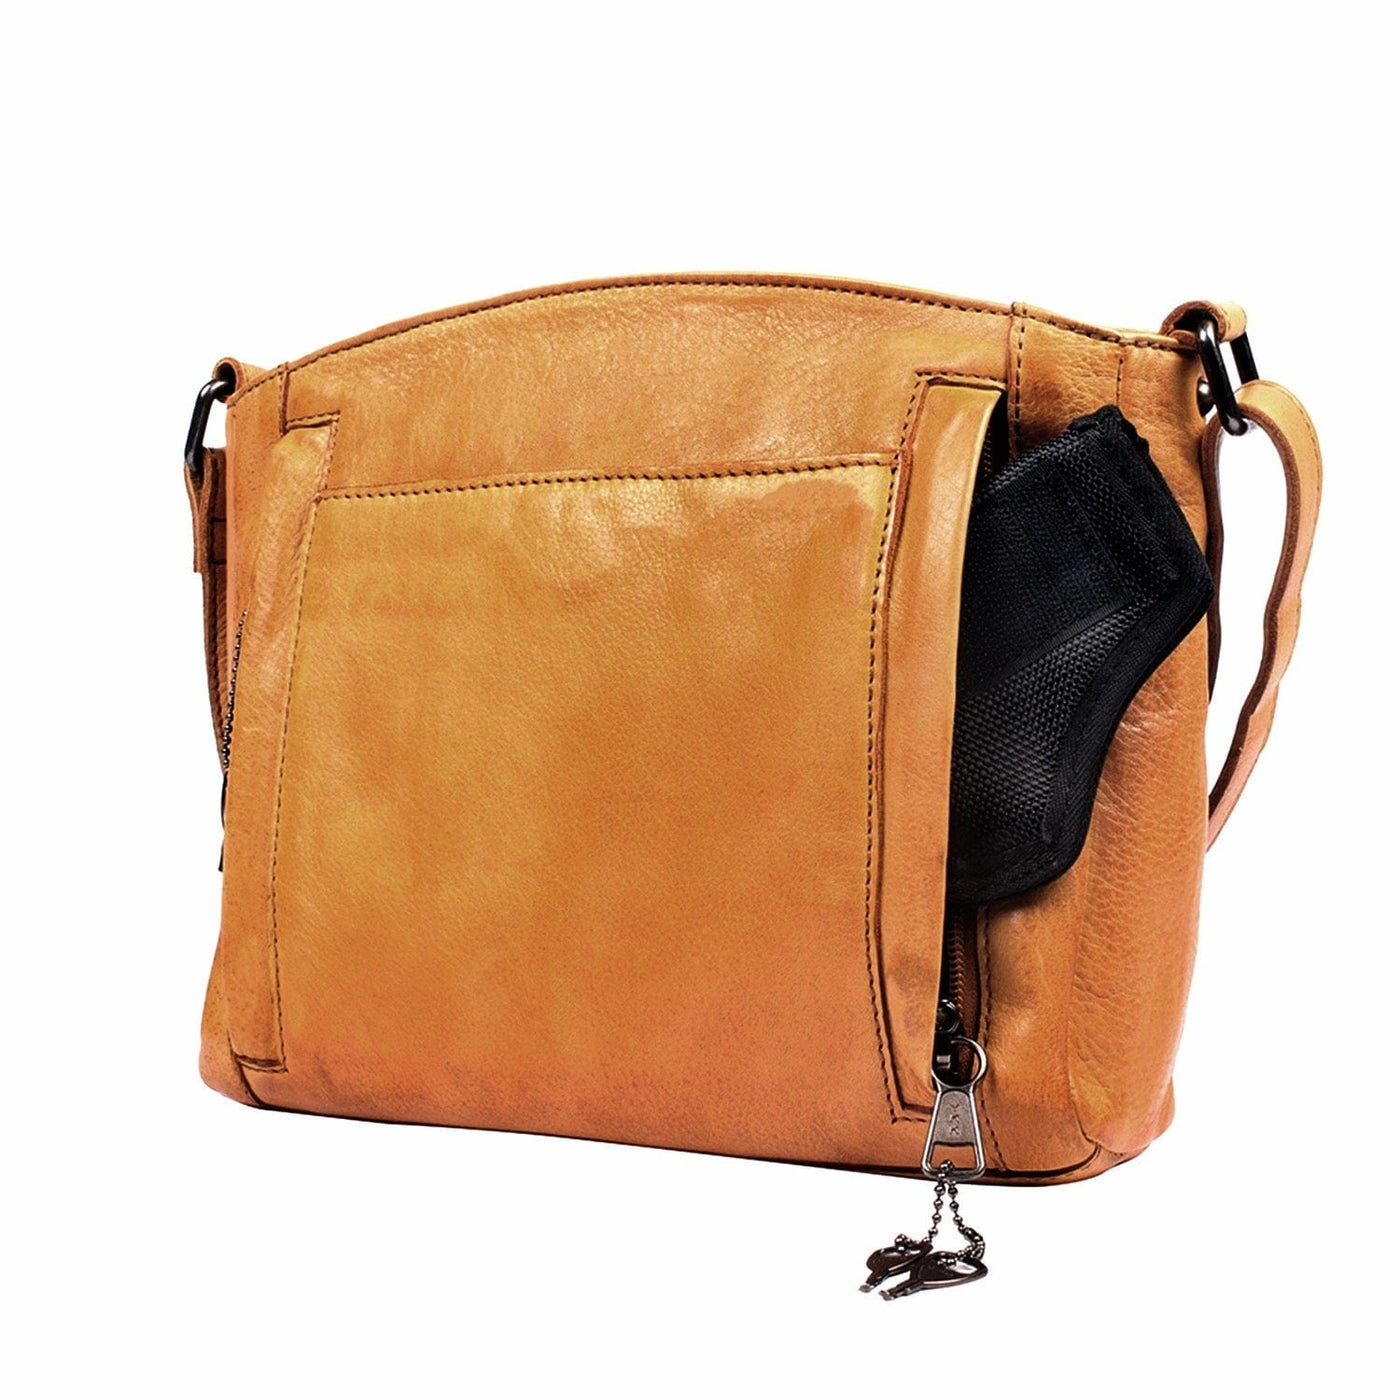 Conceal carry autumn crossbody bag by Lady Conceal - Locking YKK Conceal Carry Purse - Gun Purse - Bag for Gun with Locking Zippers - CCW bags - Purse for Pistol